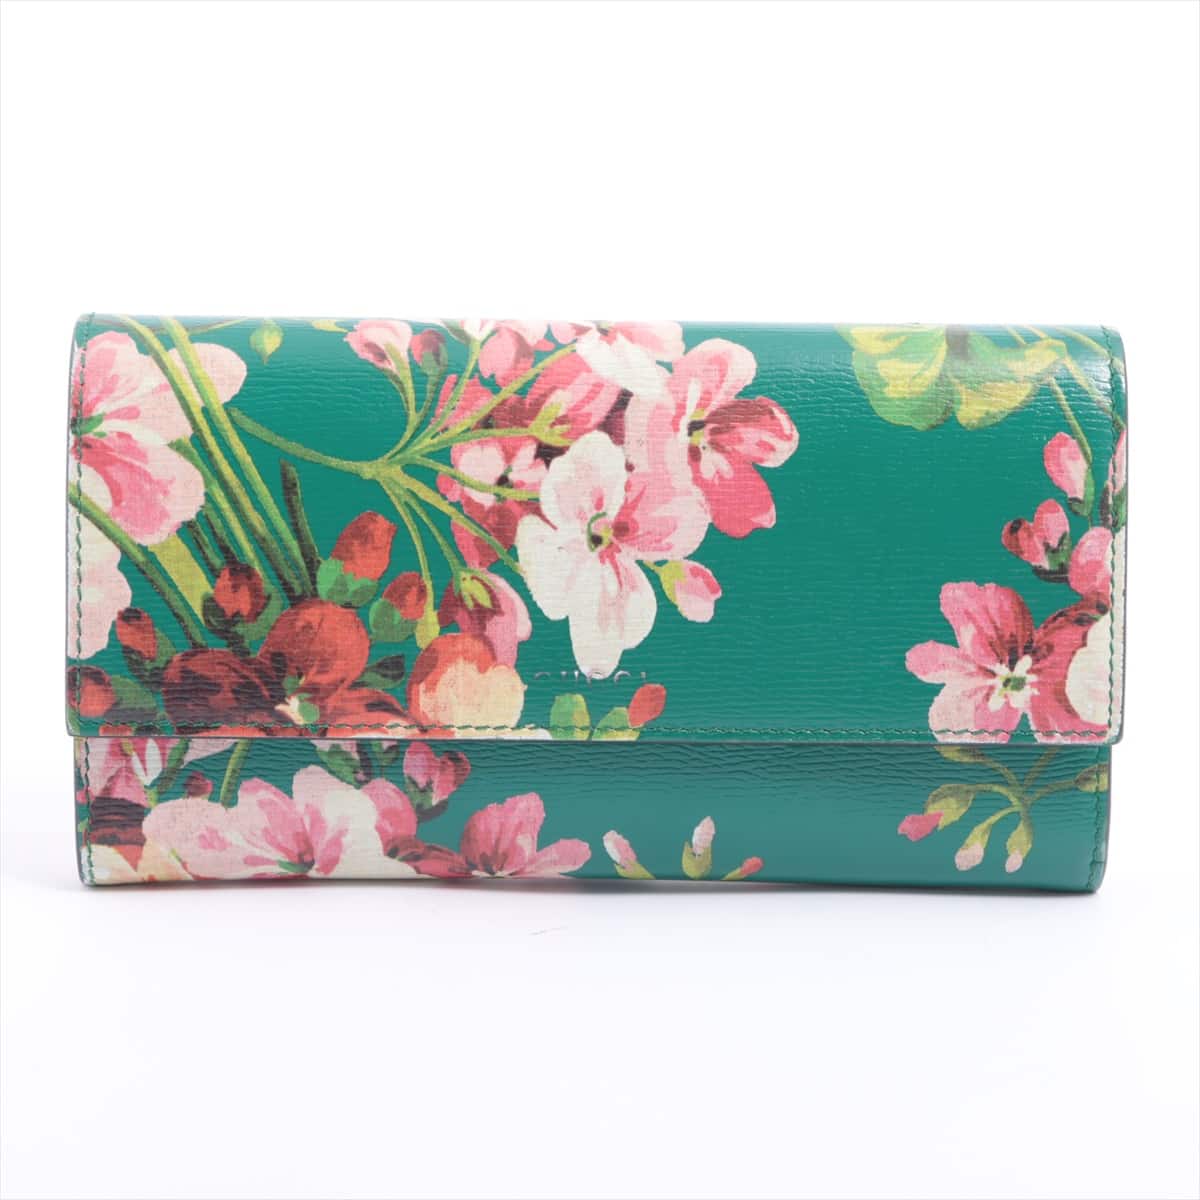 Gucci Blooms Continental wallet 410100 Leather Wallet Green